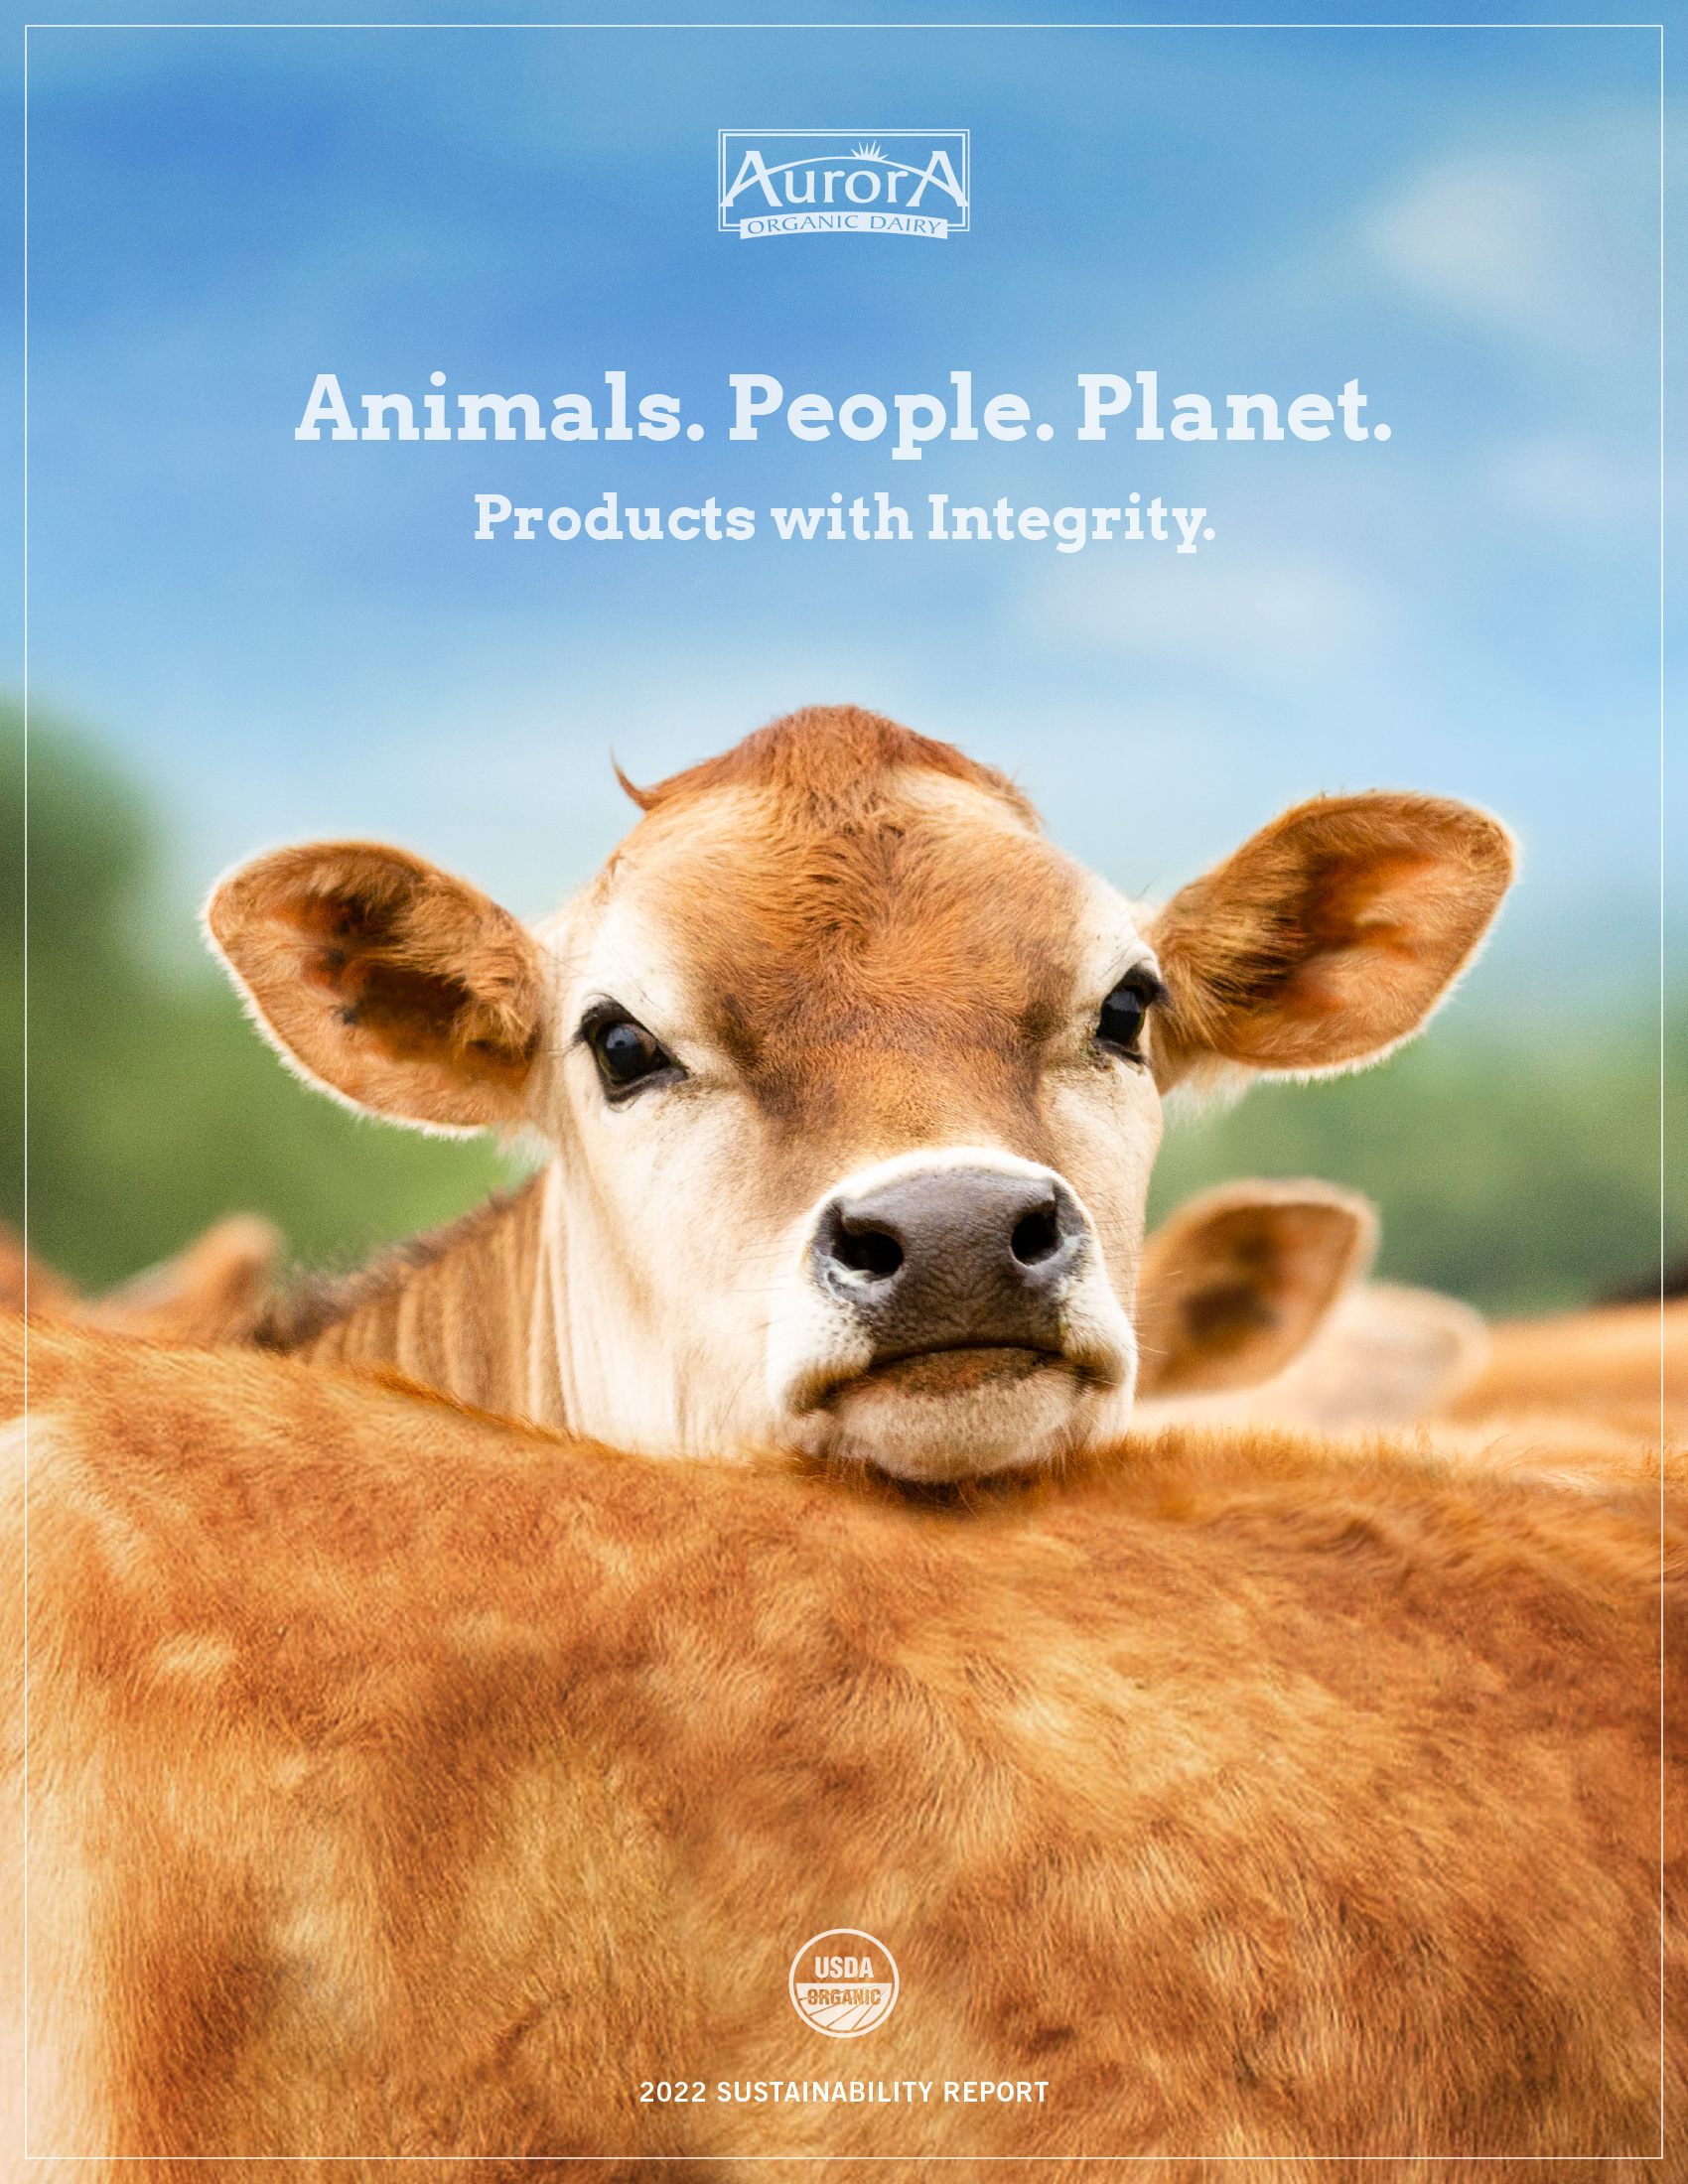   
																Aurora Organic Dairy Demonstrates Progress Towards Its Animals, People and Planet Goals in Its 2022 Sustainability Report 
															 